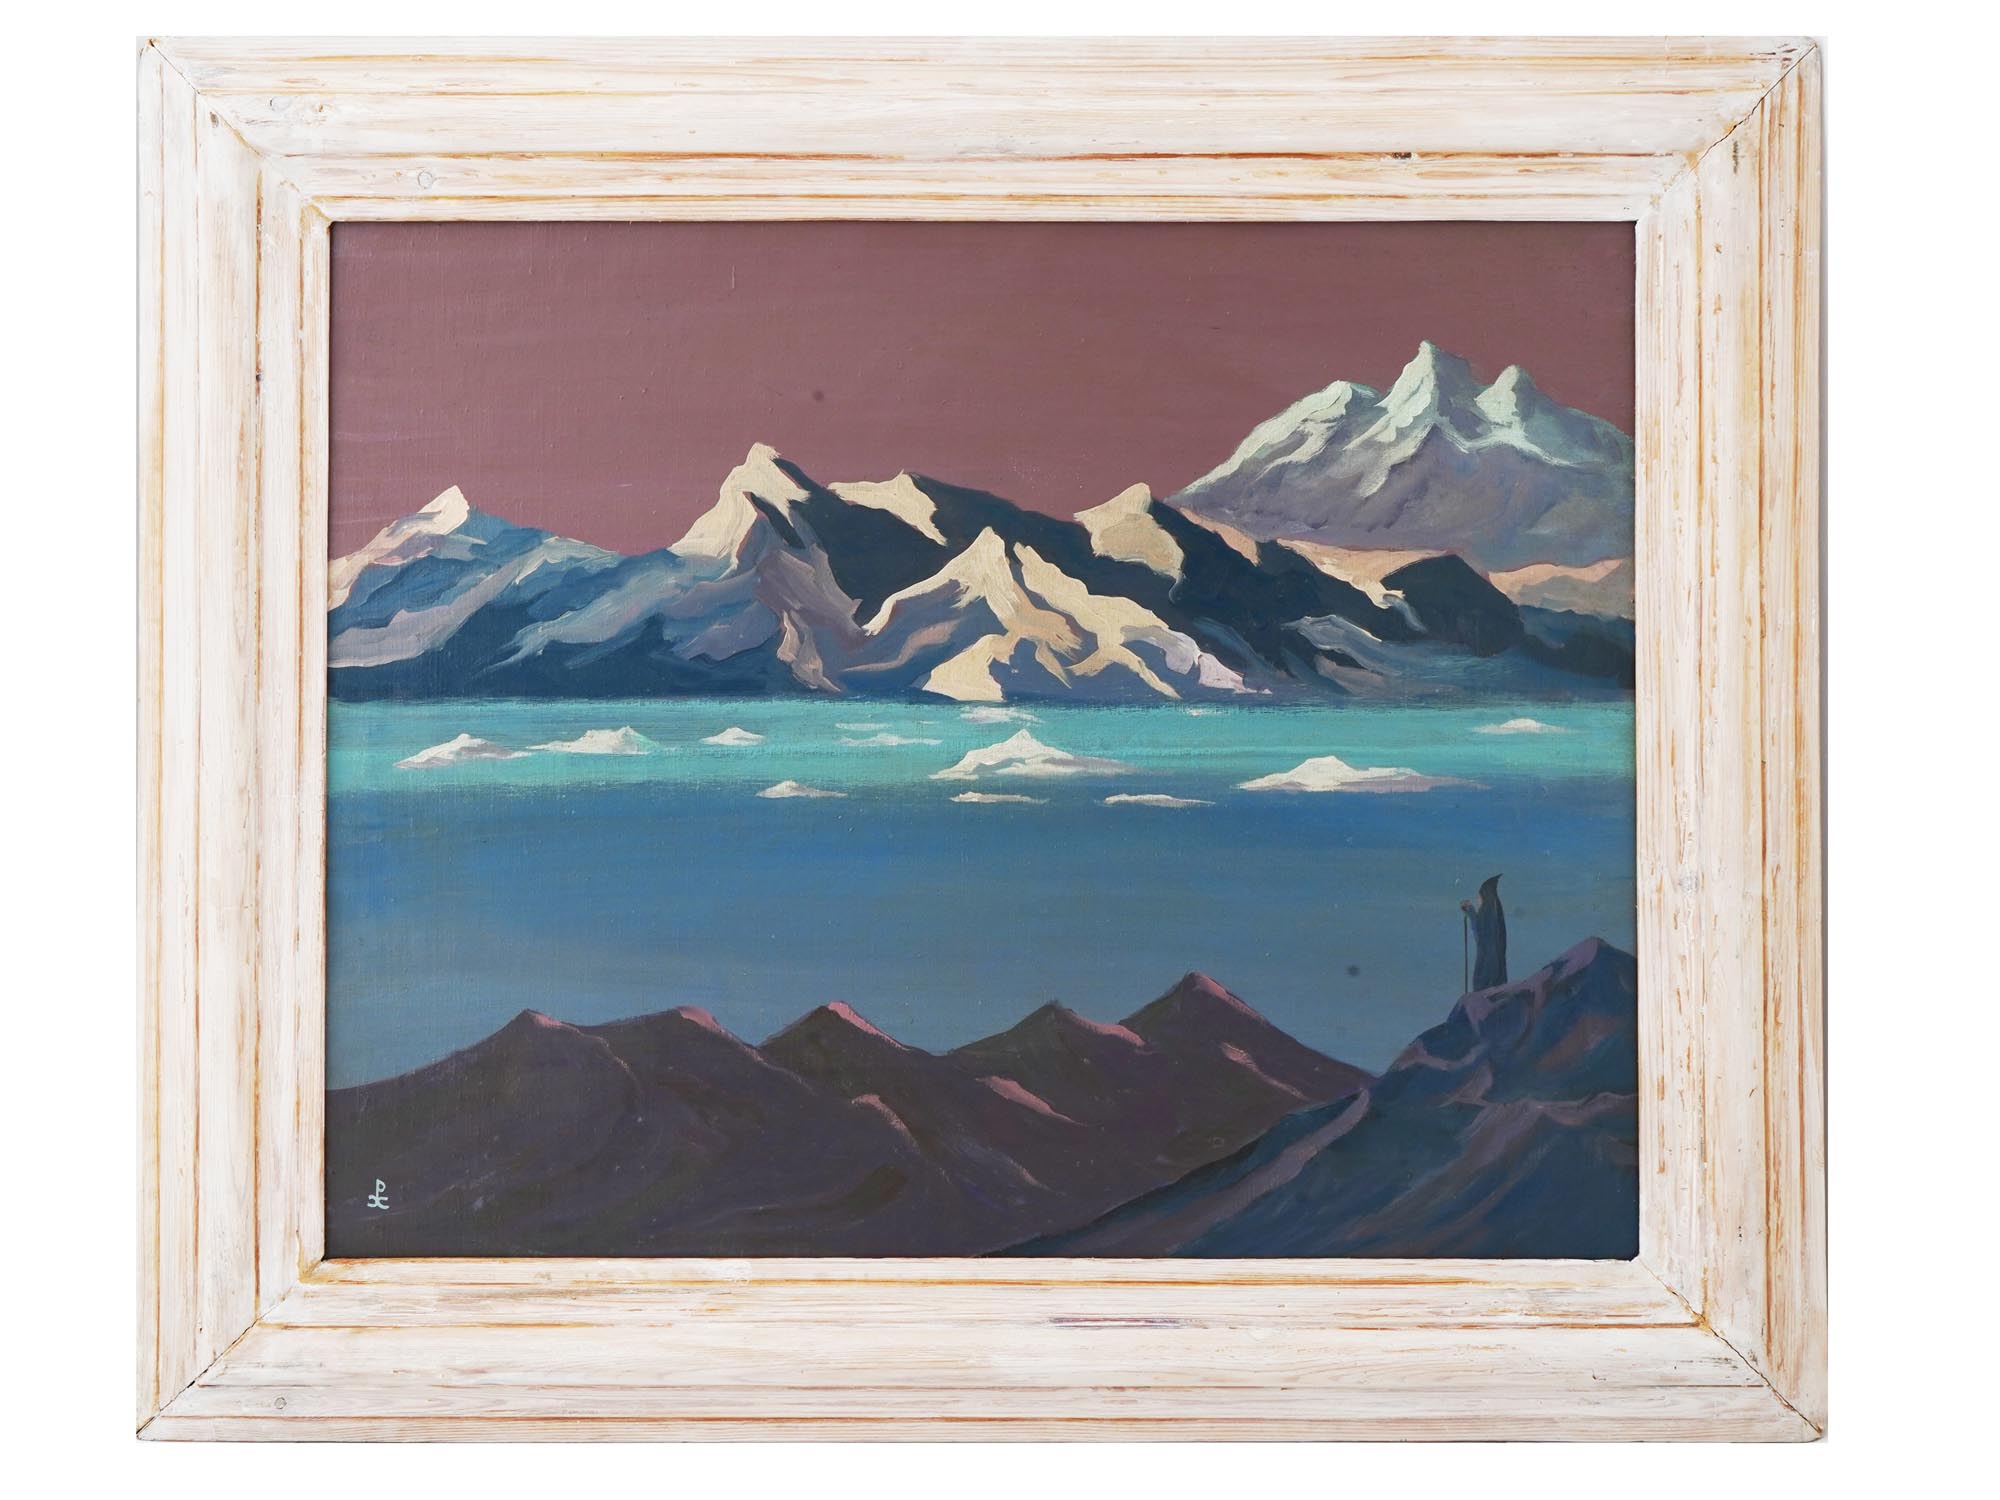 RUSSIAN AFTER NICHOLAS ROERICH LANDSCAPE PAINTING PIC-0